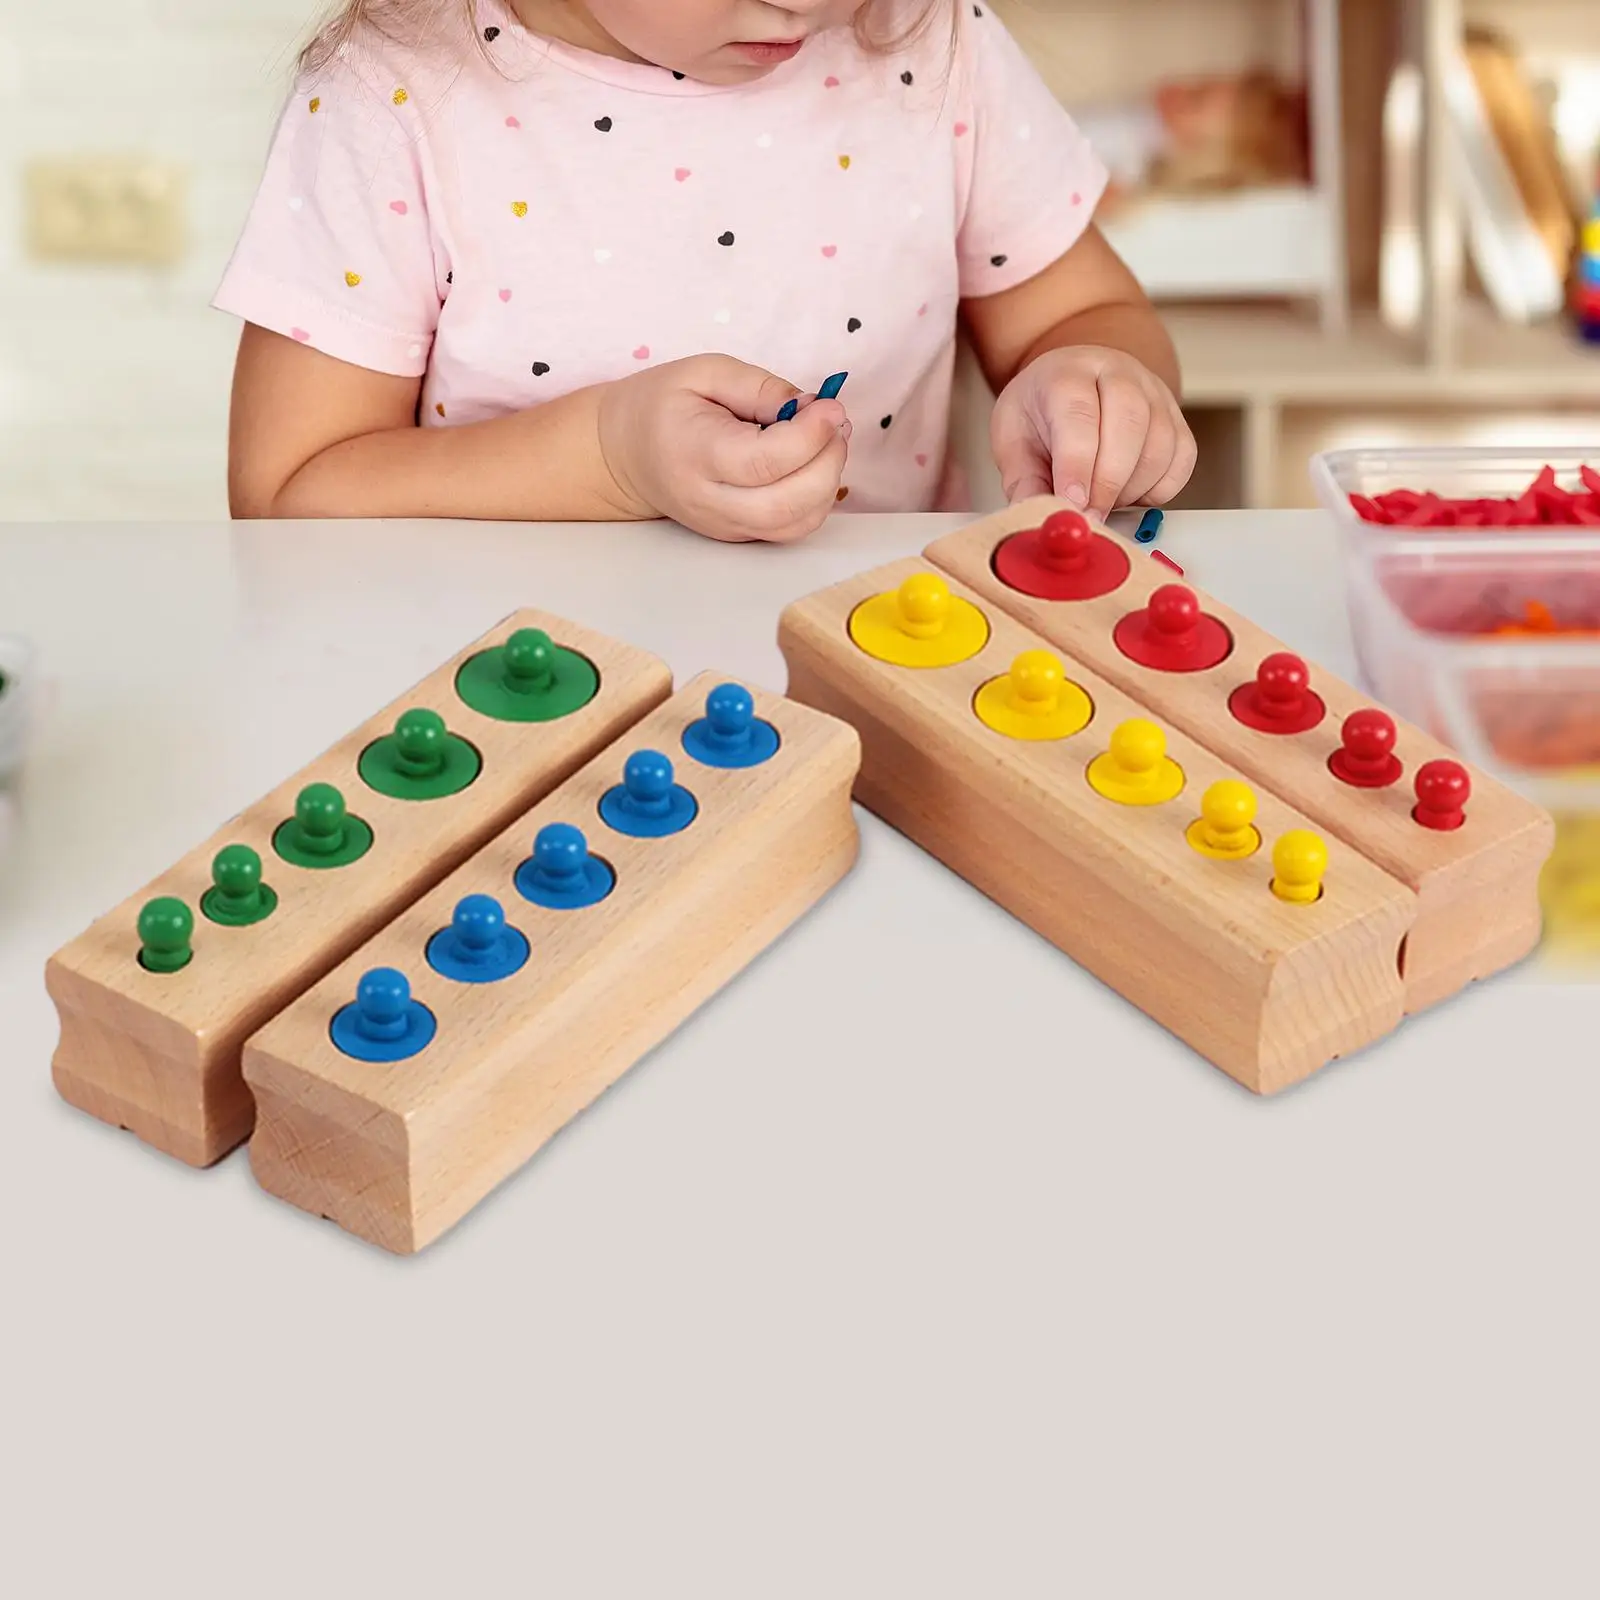 4 Pieces Montessori Toy Early Development Knobbed Cylinders Blocks Socket Sensory Toys for Preschool Toys School Toddlers Kids